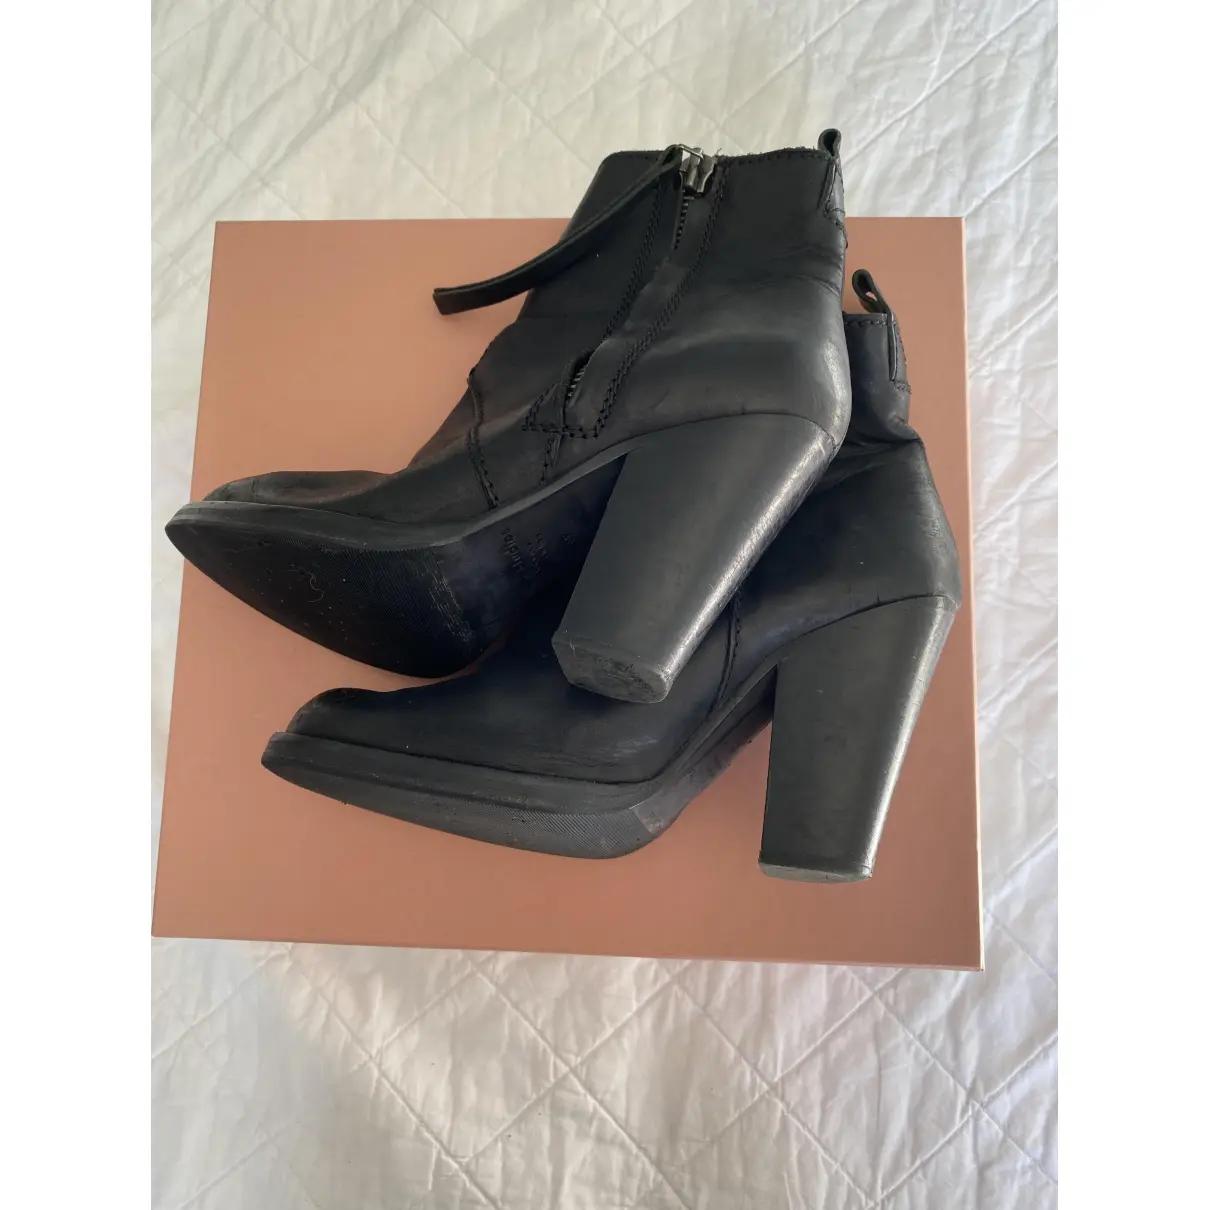 Buy Acne Studios Pistol leather ankle boots online